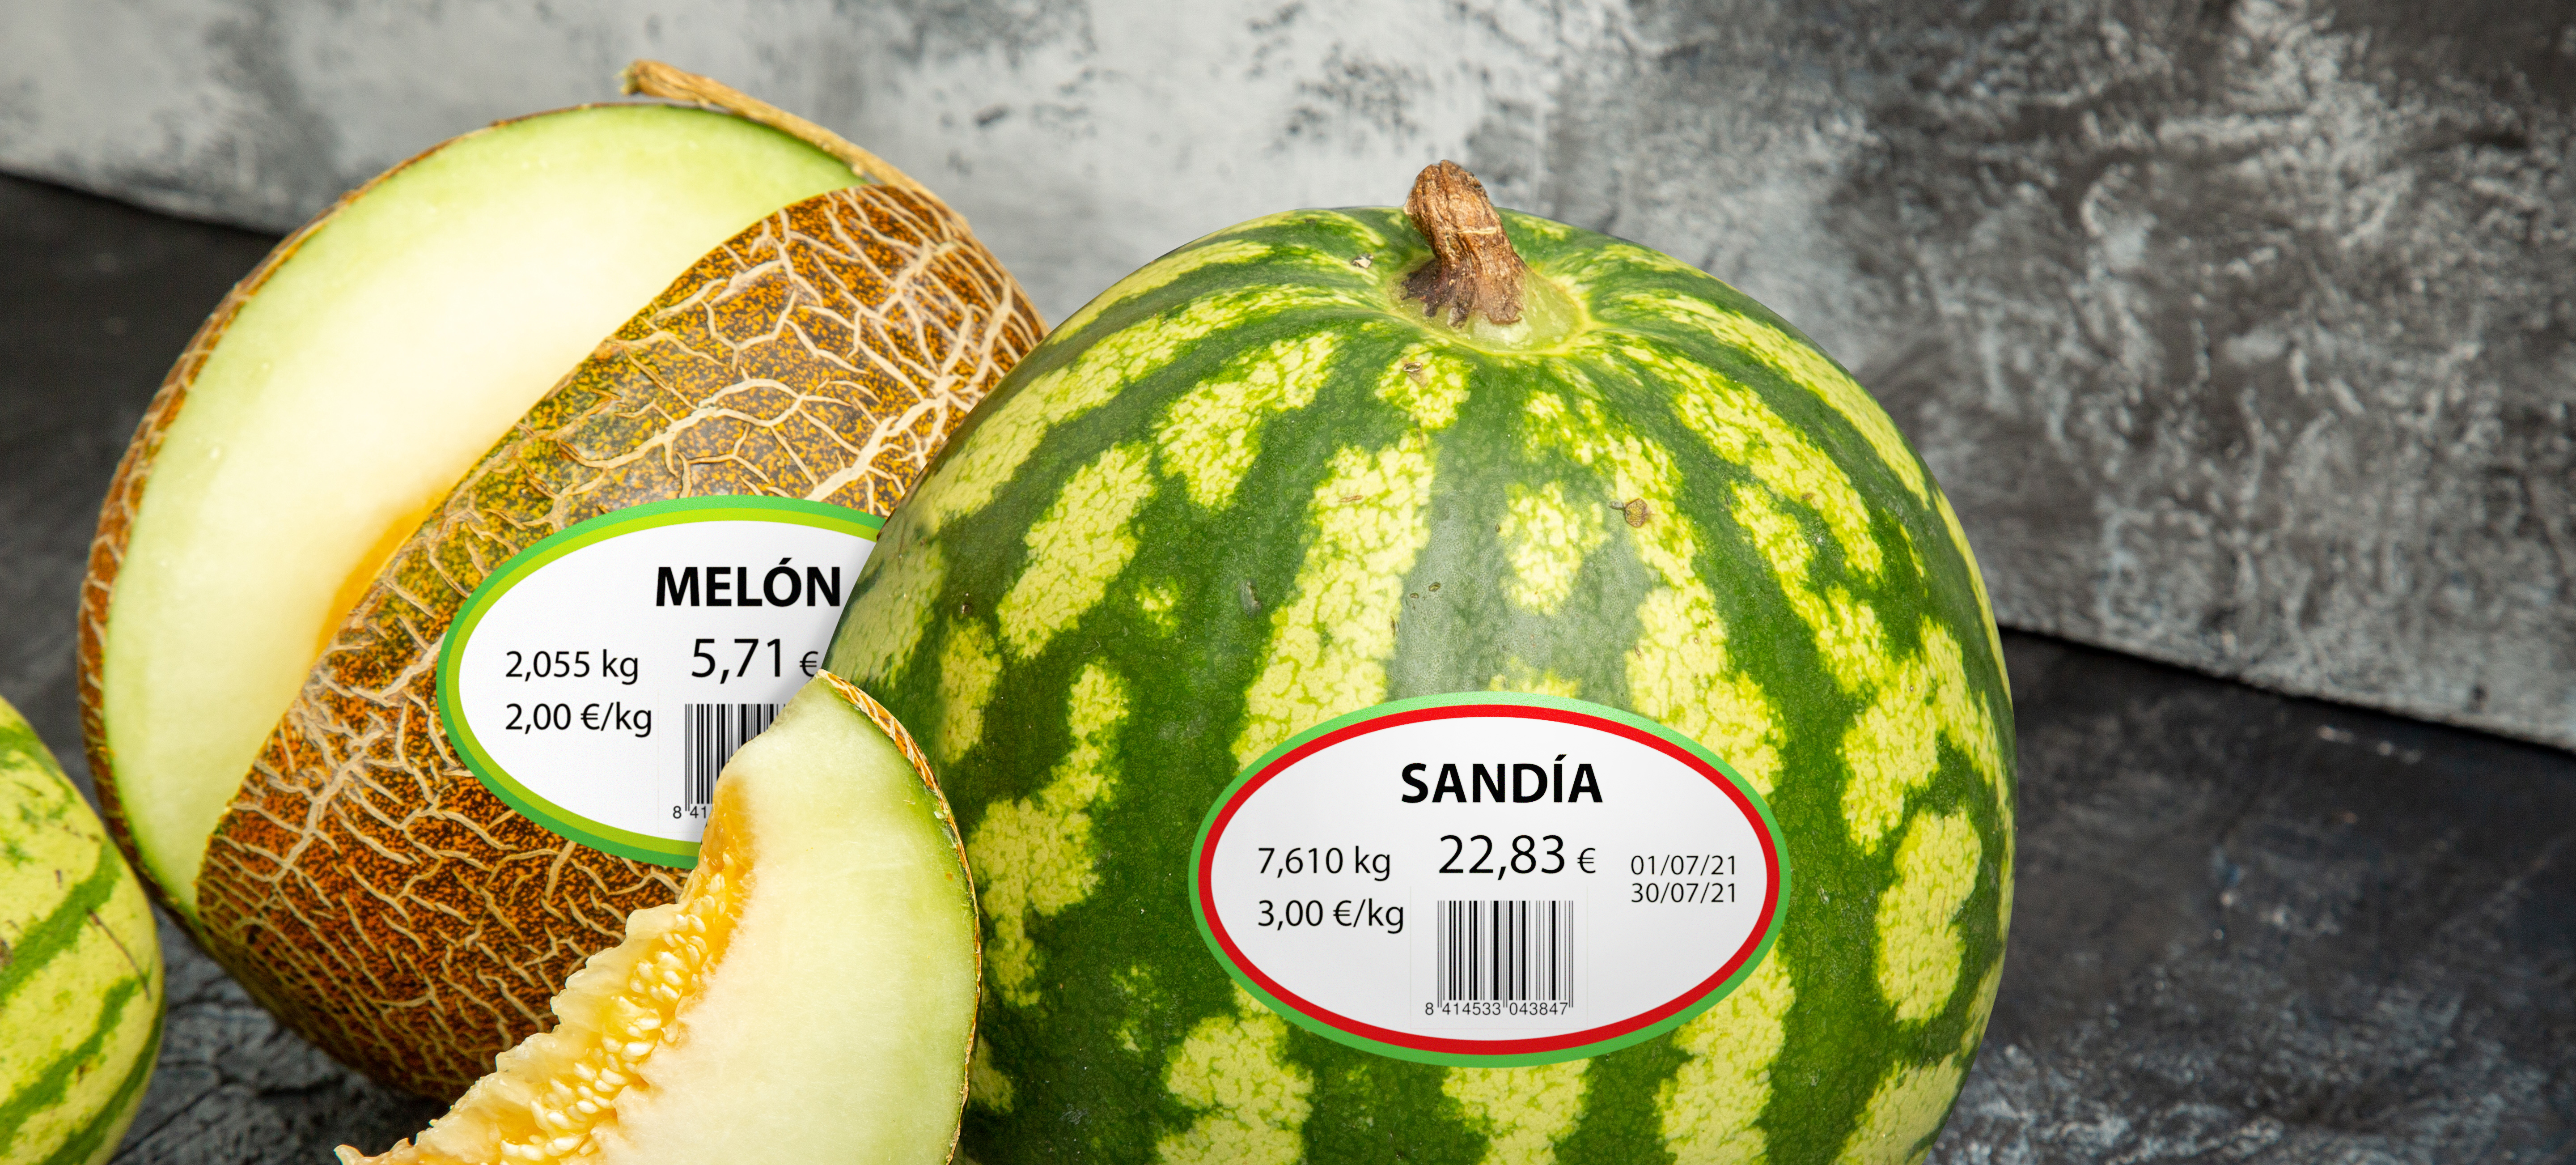 The season begins and we have the ideal automatic weighing and labelling equipment for melons and watermelons